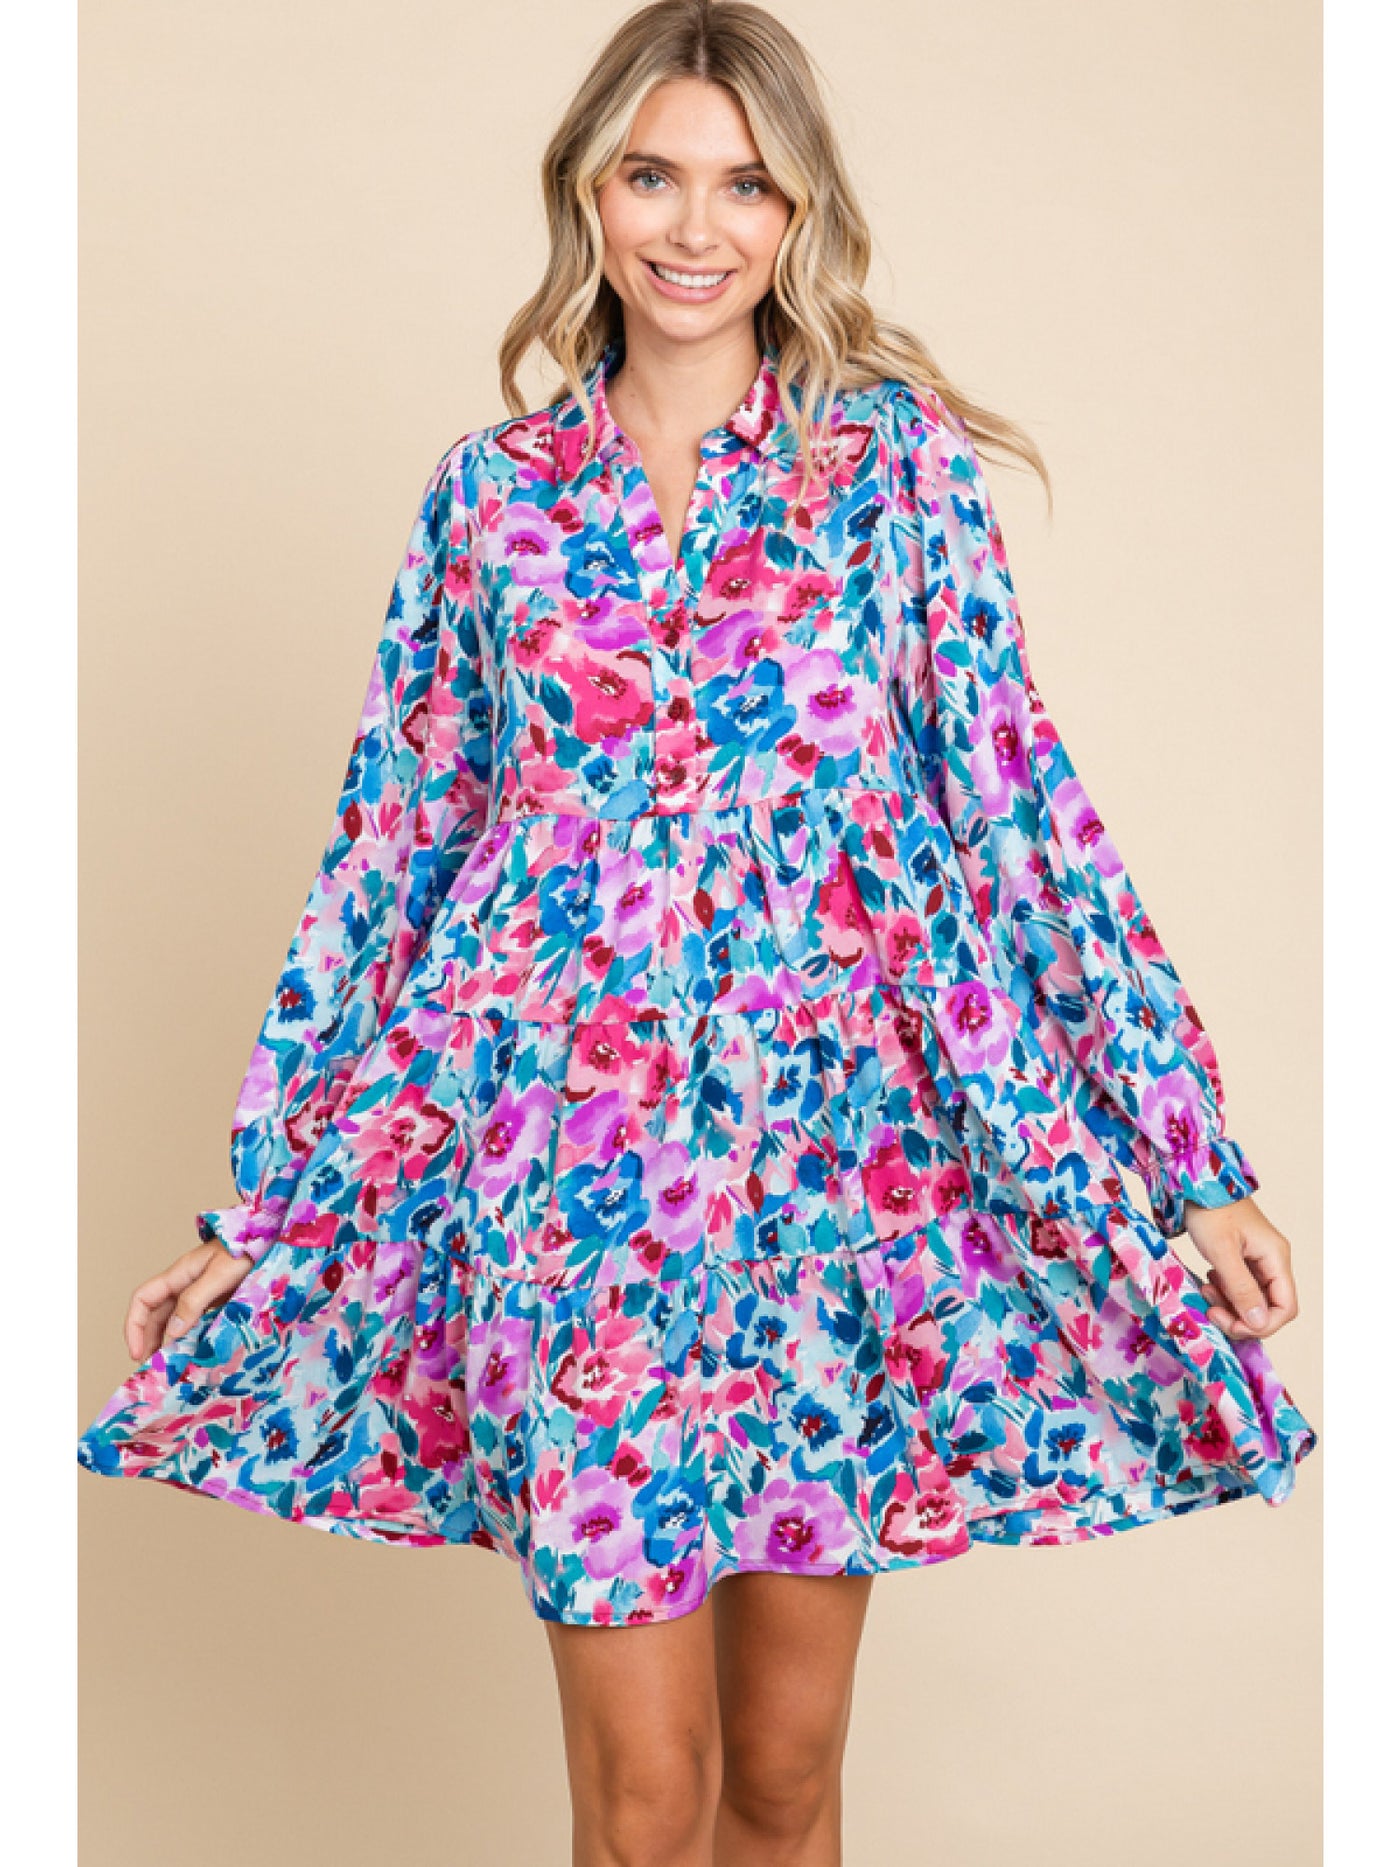 Wine Mix Floral Print Dress with Buttoned Collar Neck